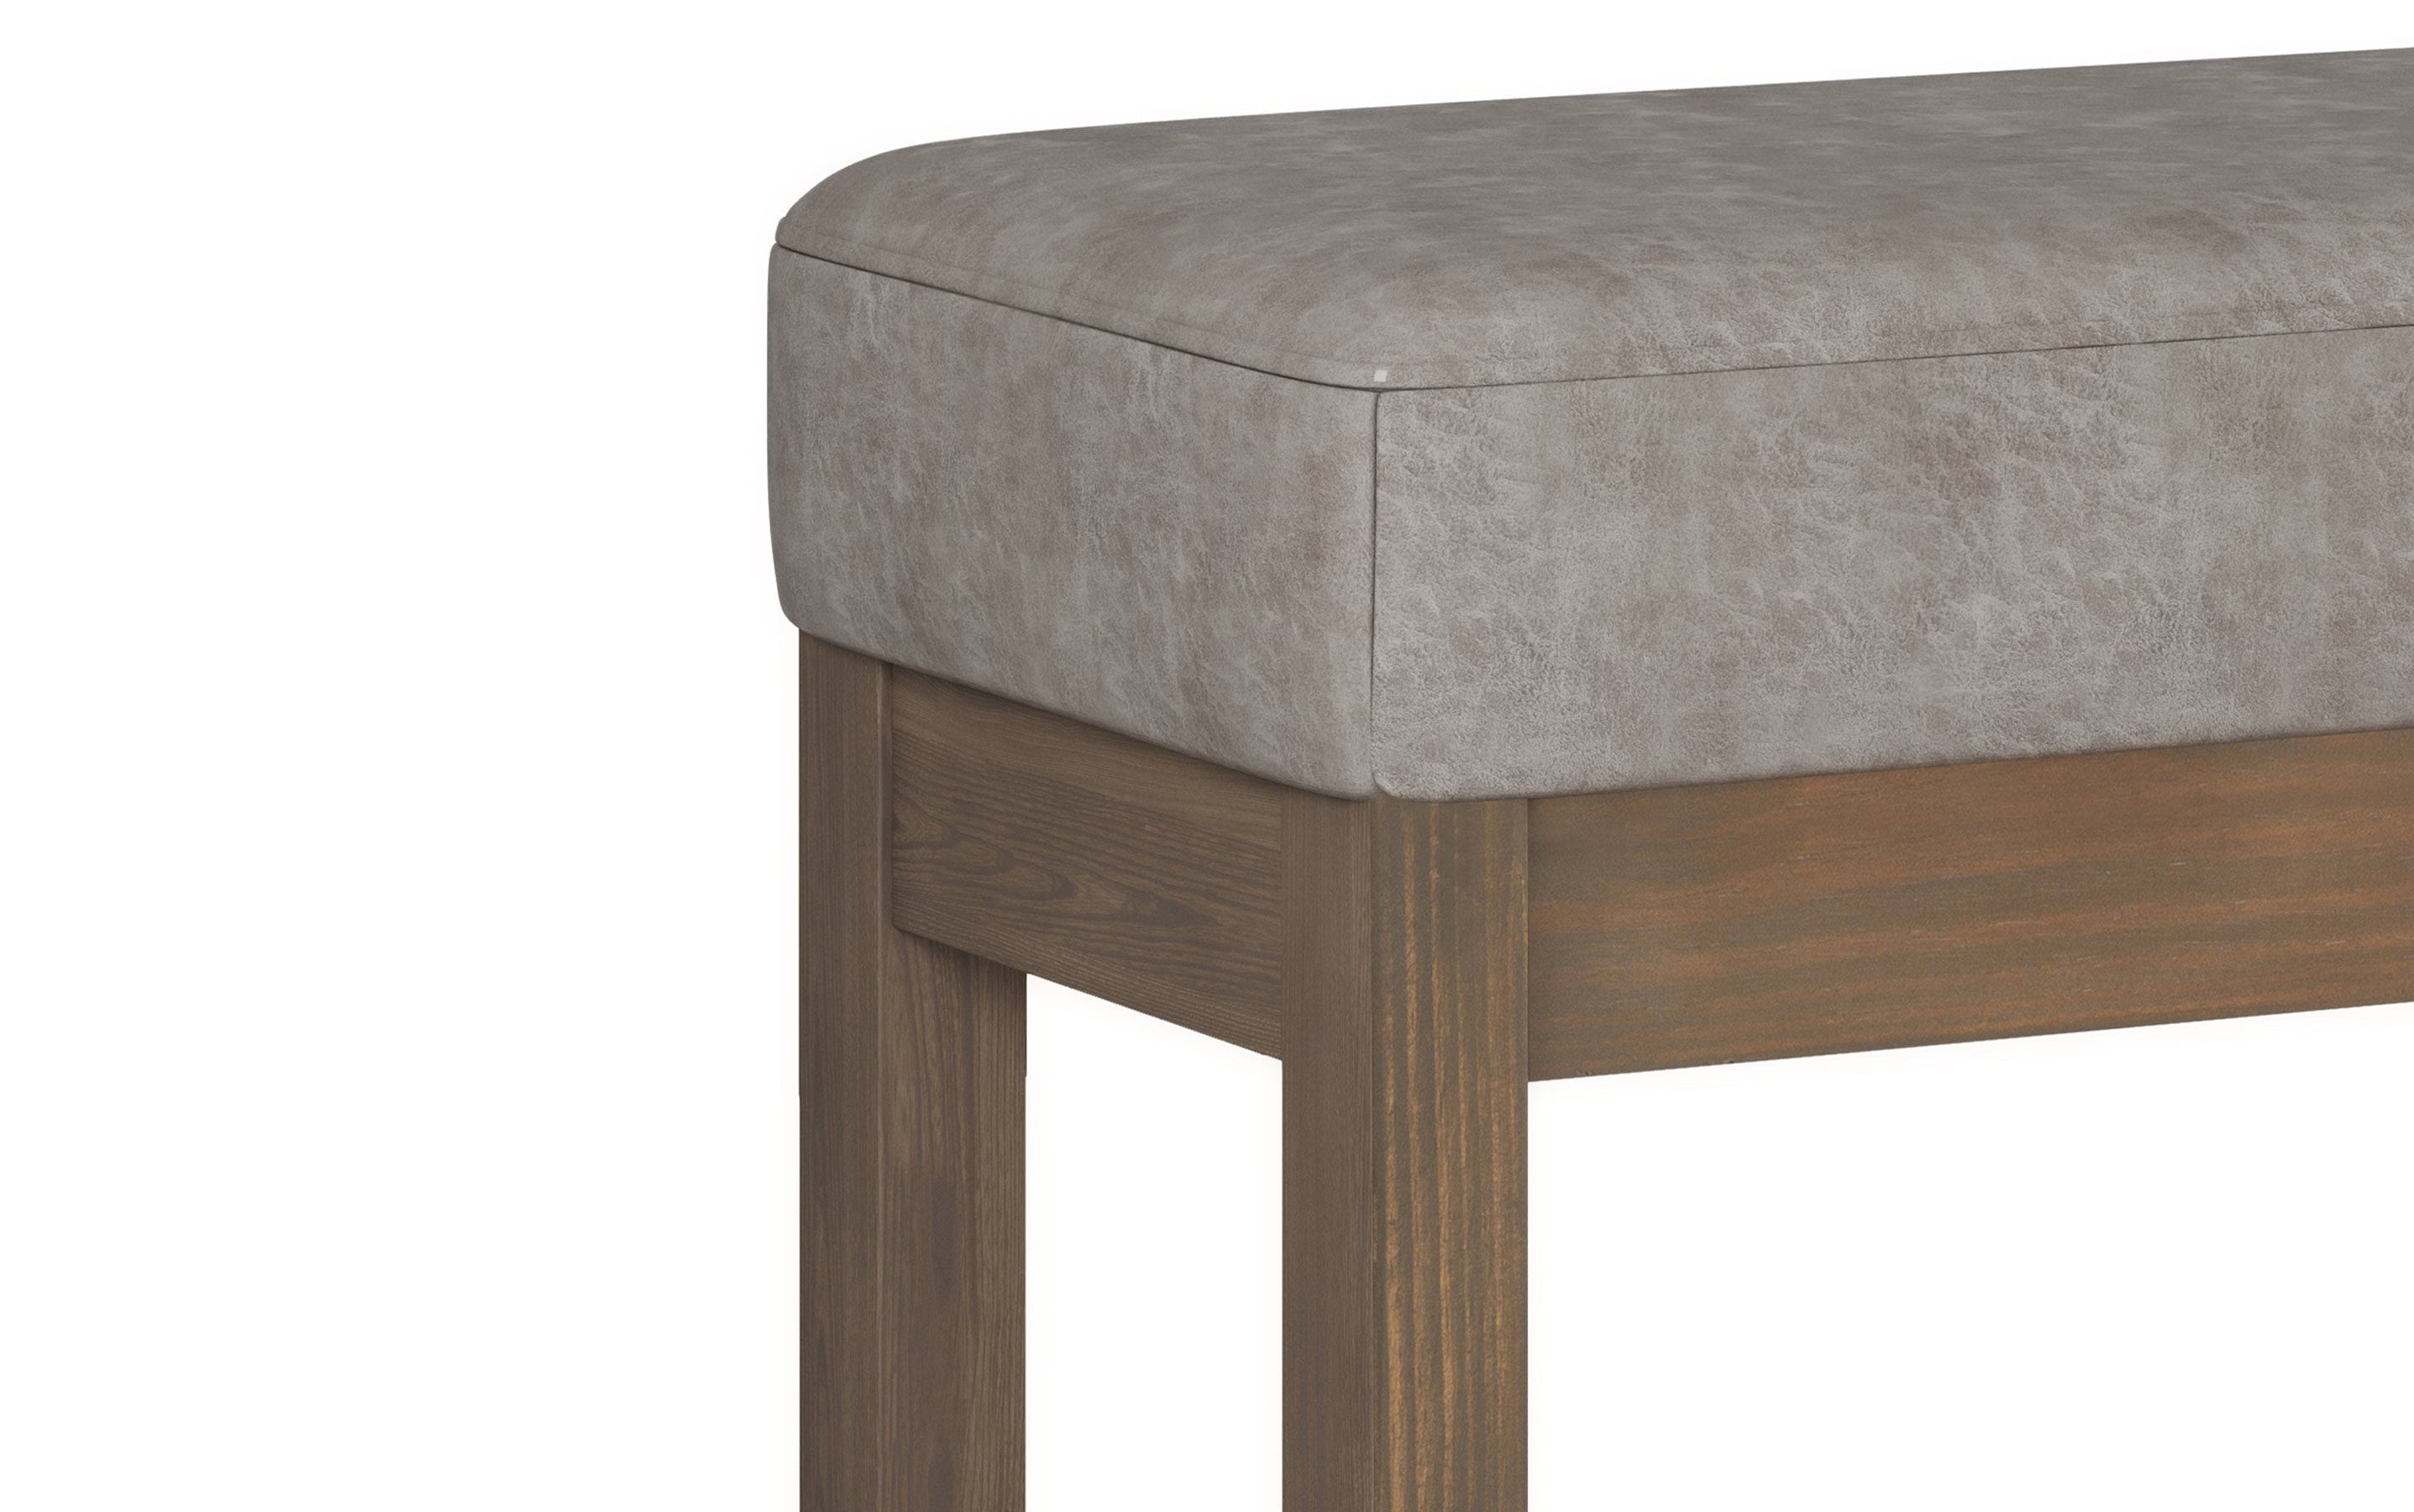 Distressed Grey Taupe Distressed Vegan Leather| Milltown Footstool Small Ottoman Bench